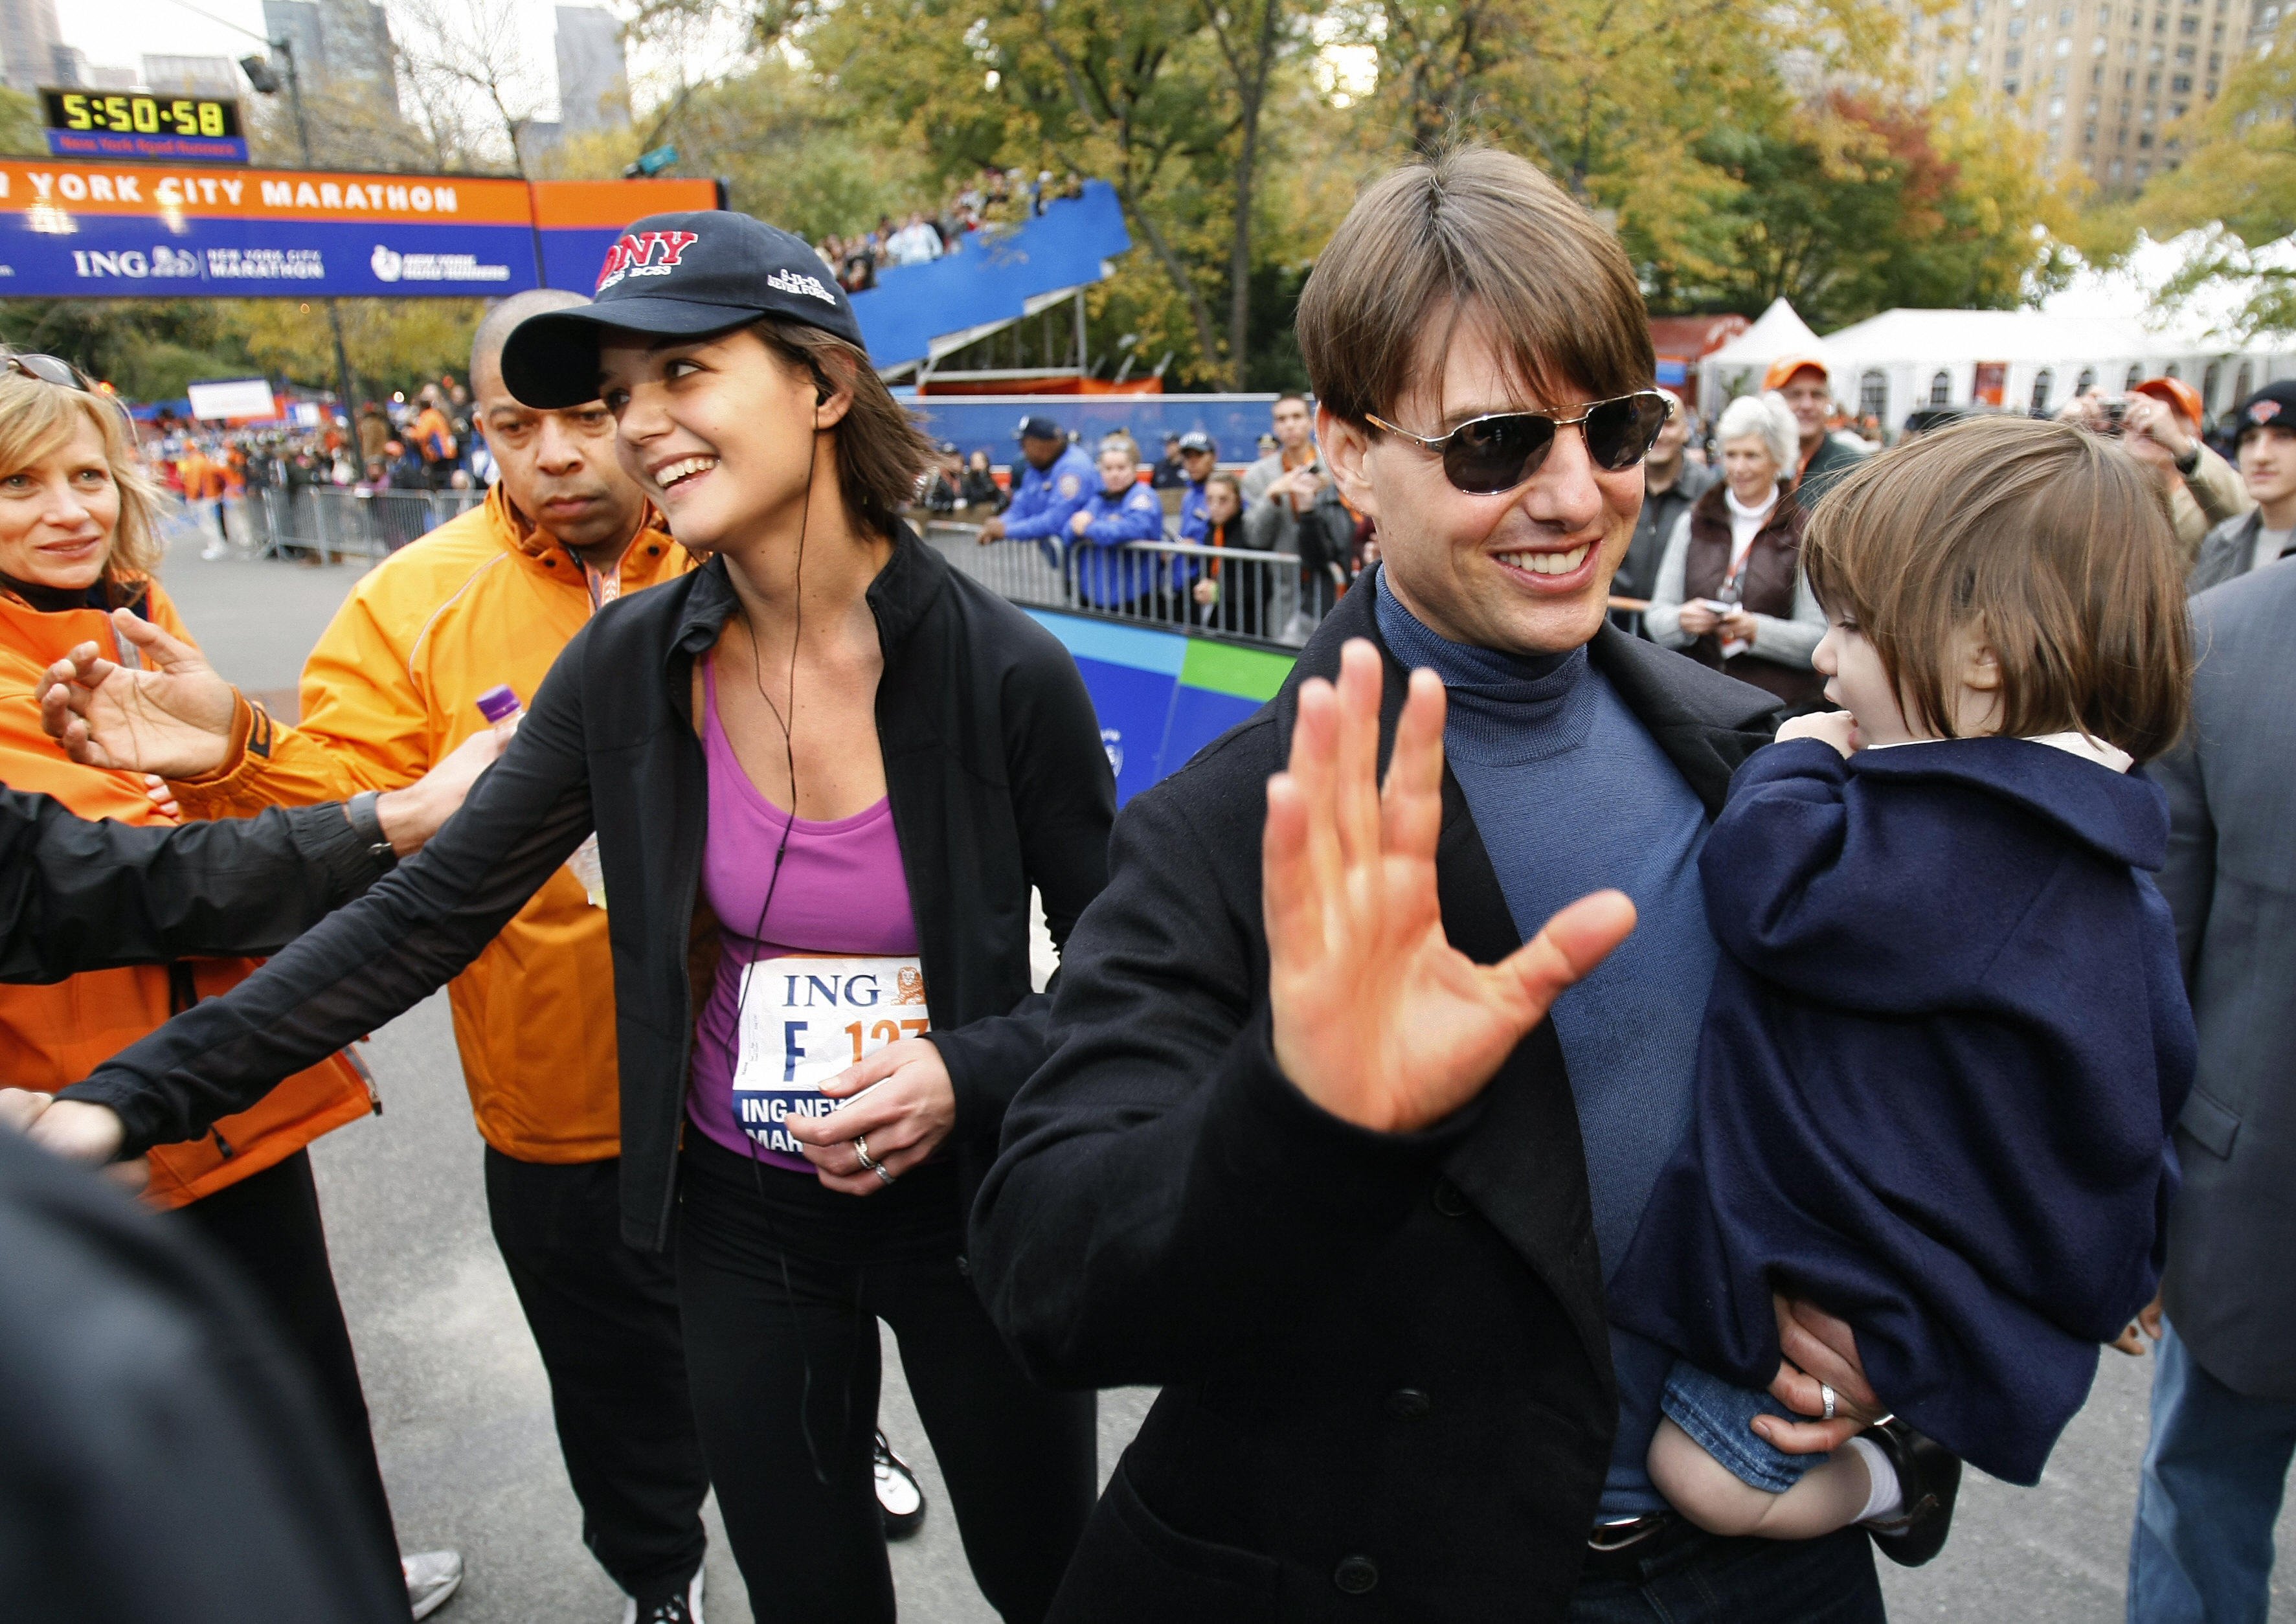 Tom Cruise with his daughter Suri meet Katie Holmes at the finish line of the New York City Marathon in 2007. | Source: Getty Images